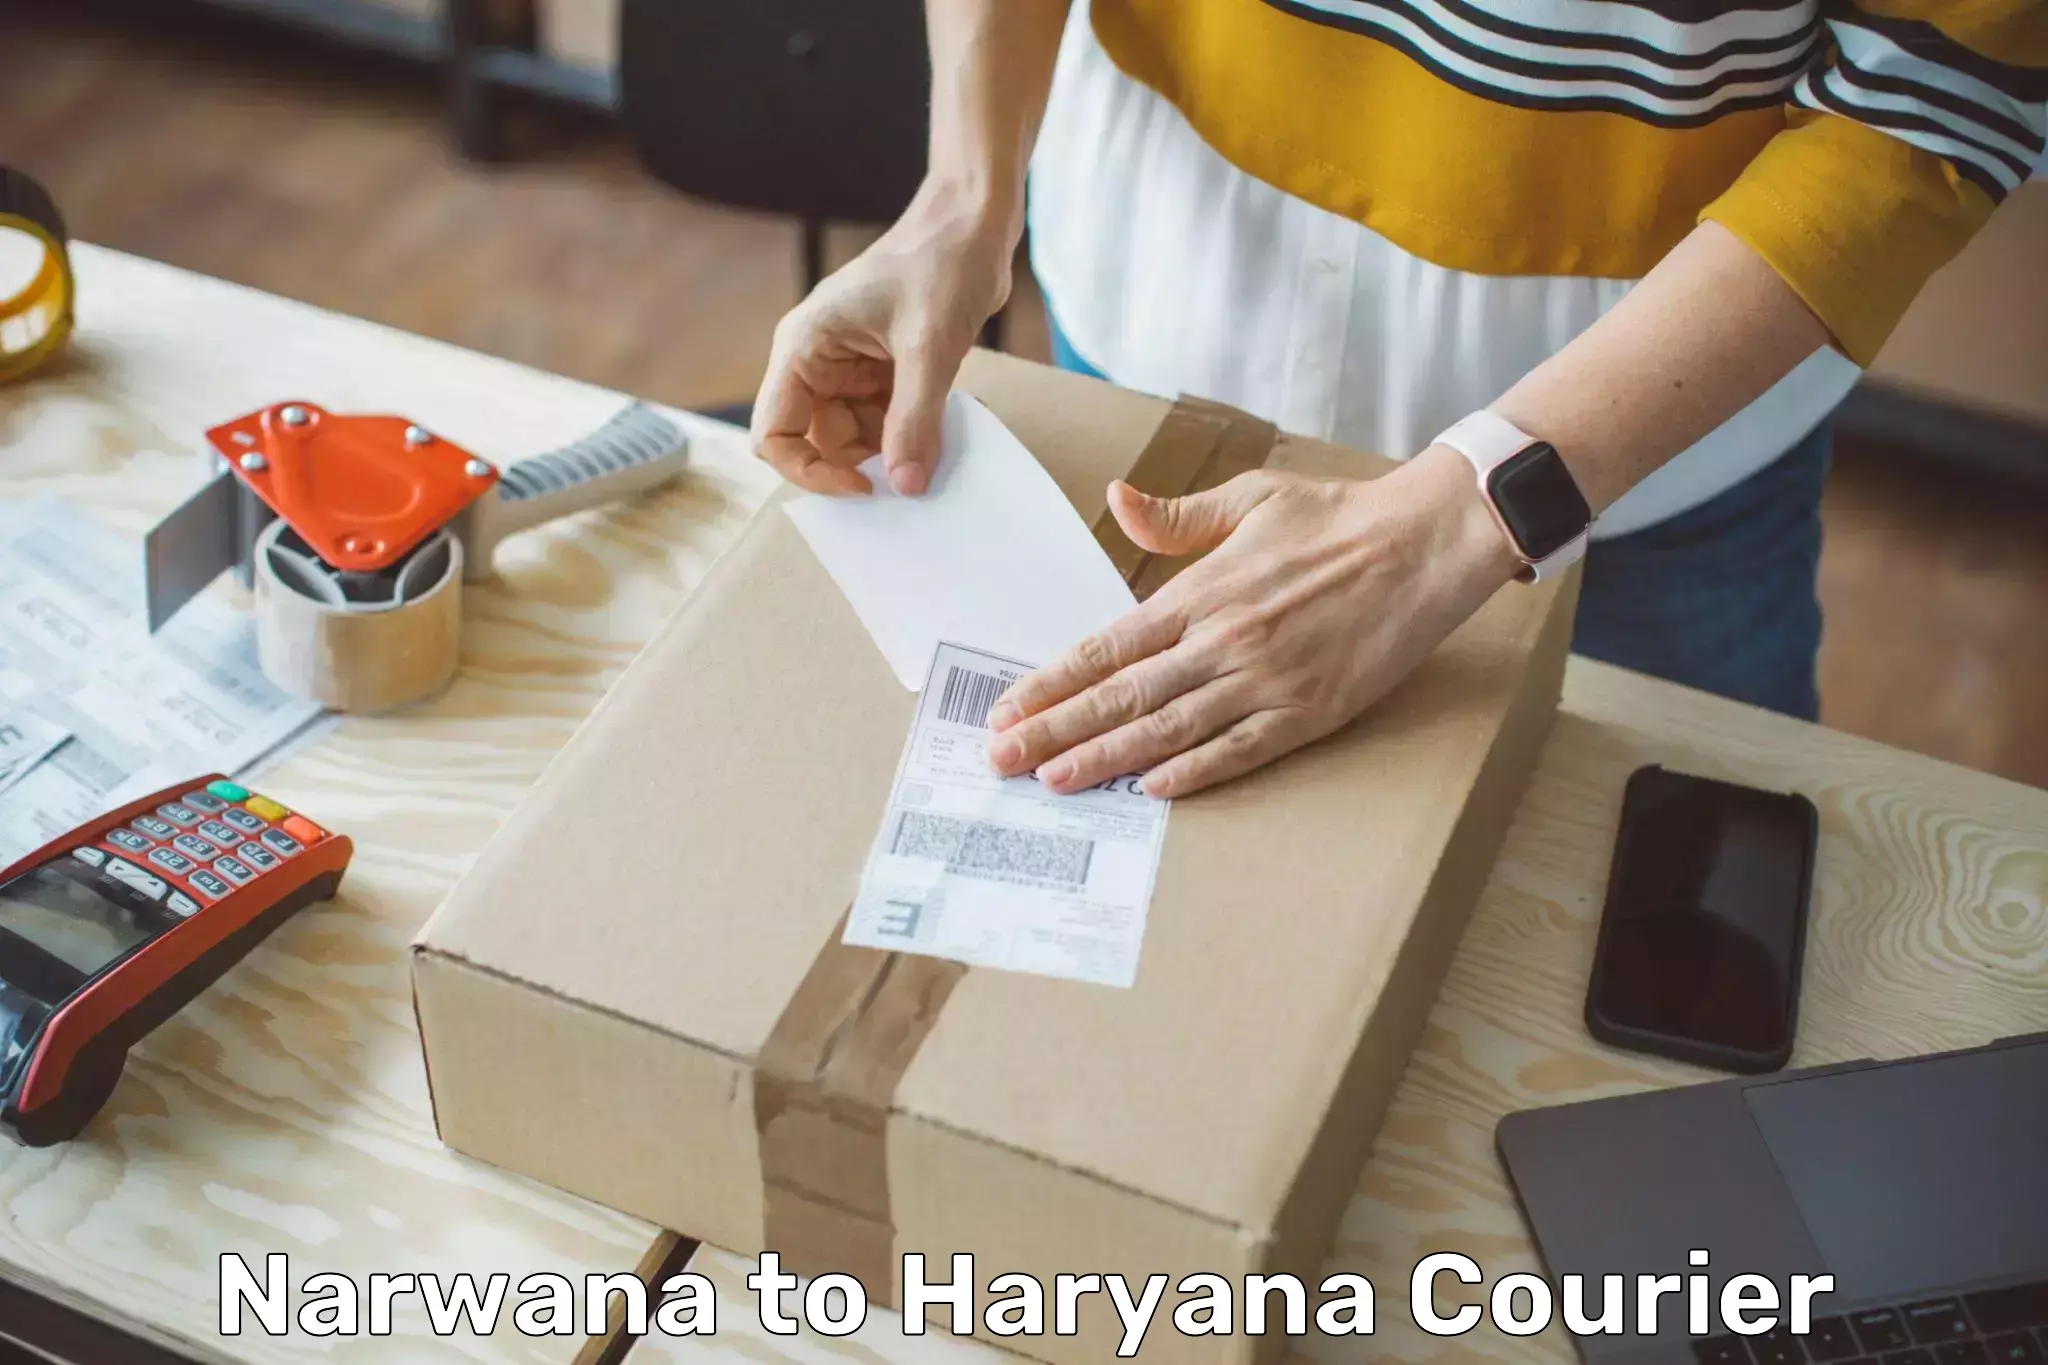 Fragile item shipping in Narwana to Palwal